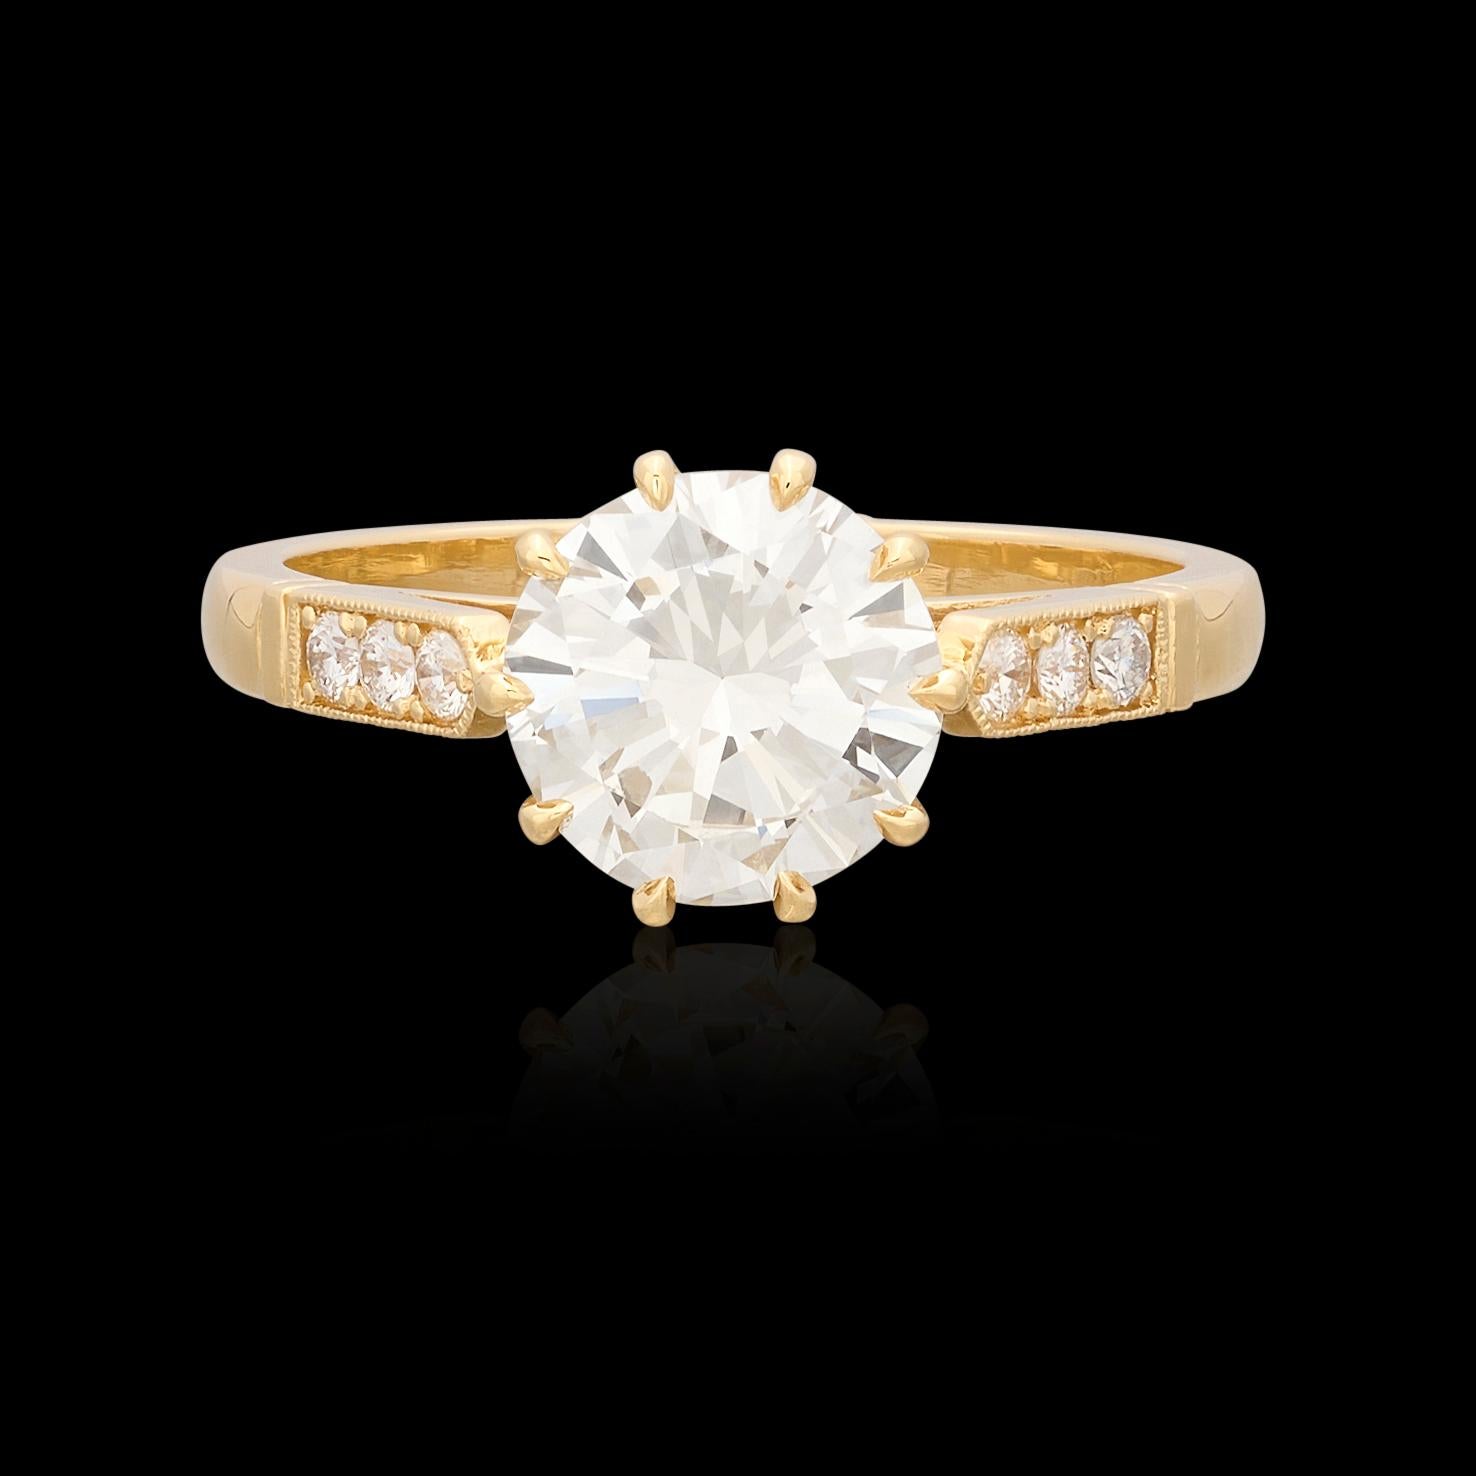 A timeless design with a modern twist and superior sparkle. The 18k yellow gold ring features a 1.84 carat round brilliant-cut diamond graded by the GIA as J/VVS1, set in 10 prongs for a unique look. The shoulders are set with six additional